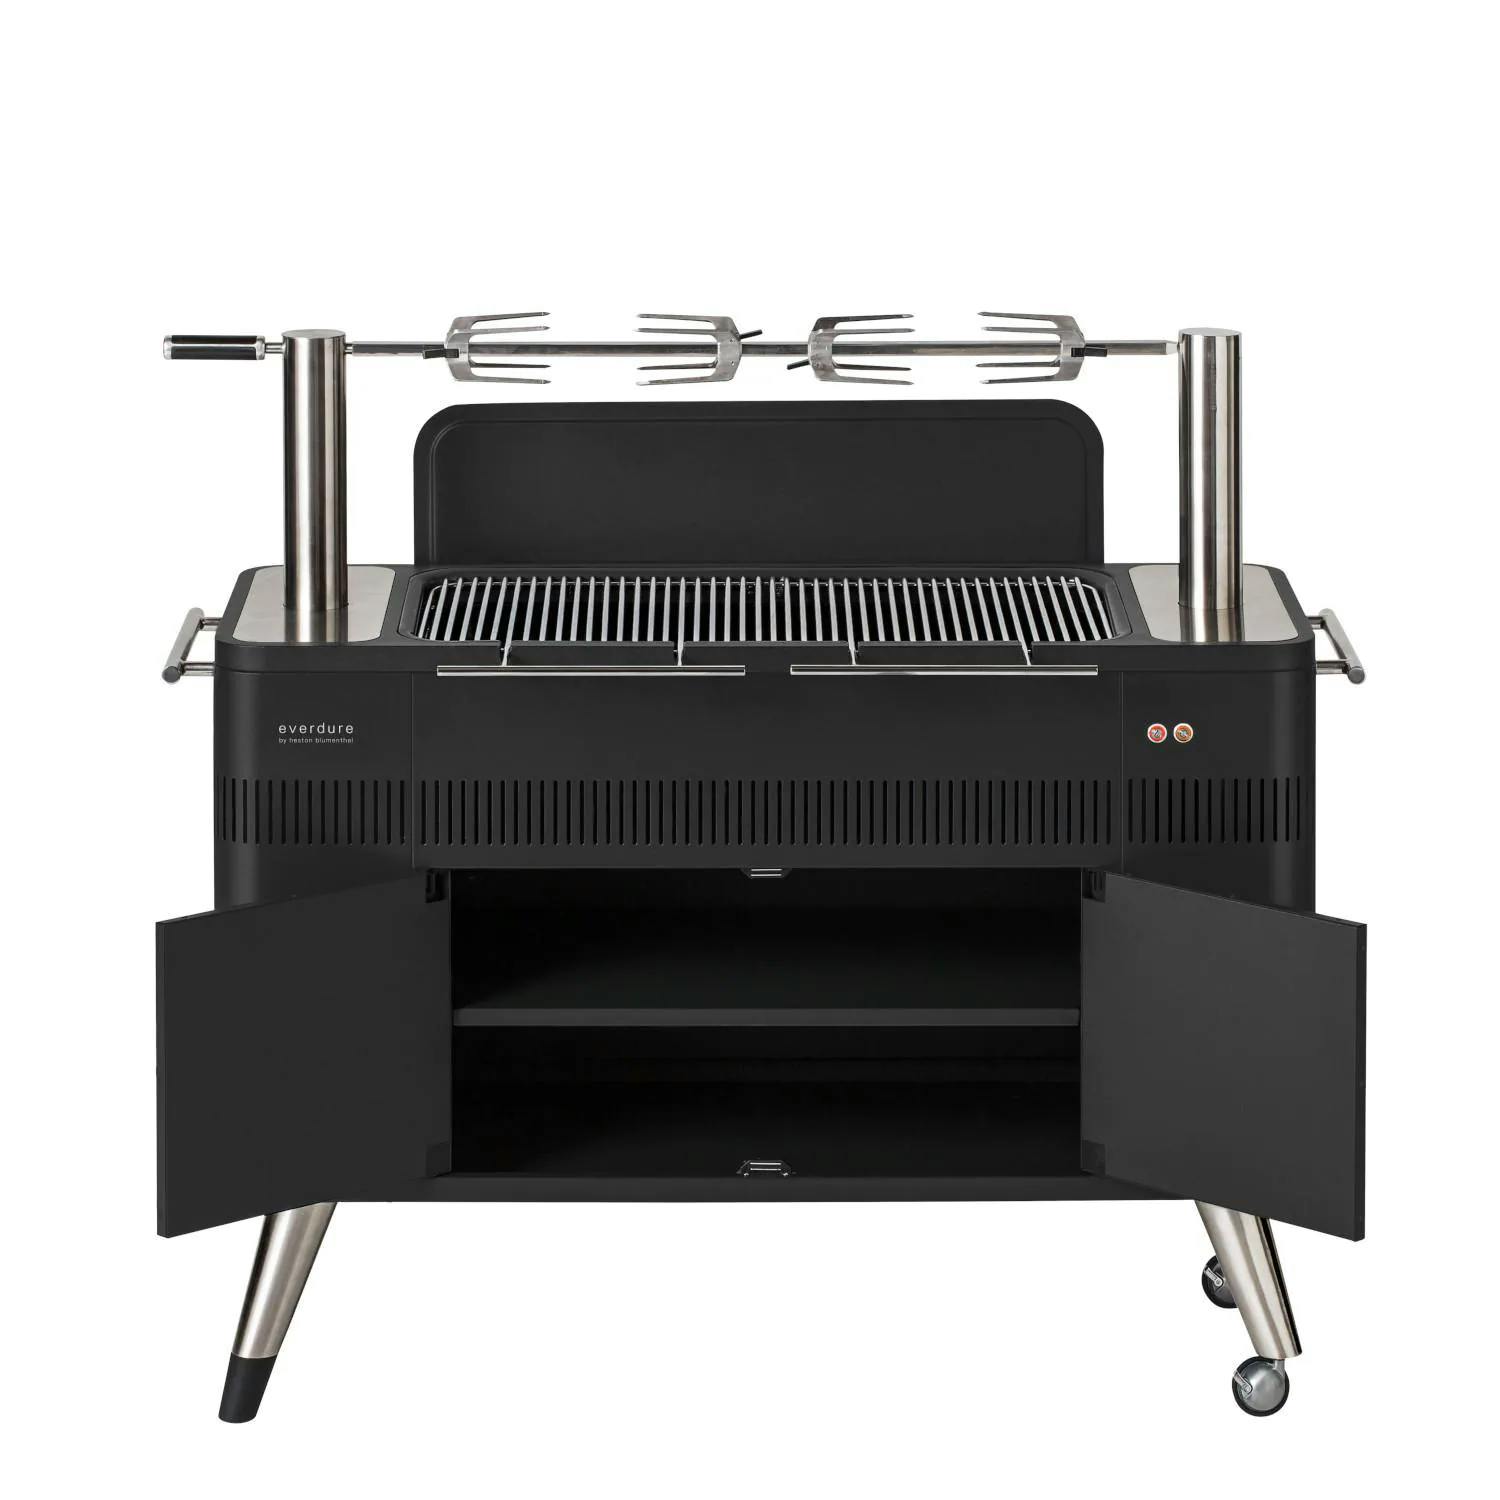 Everdure By Heston Blumenthal HUB I Charcoal Grill with Rotisserie & Electronic Ignition · 54 in.